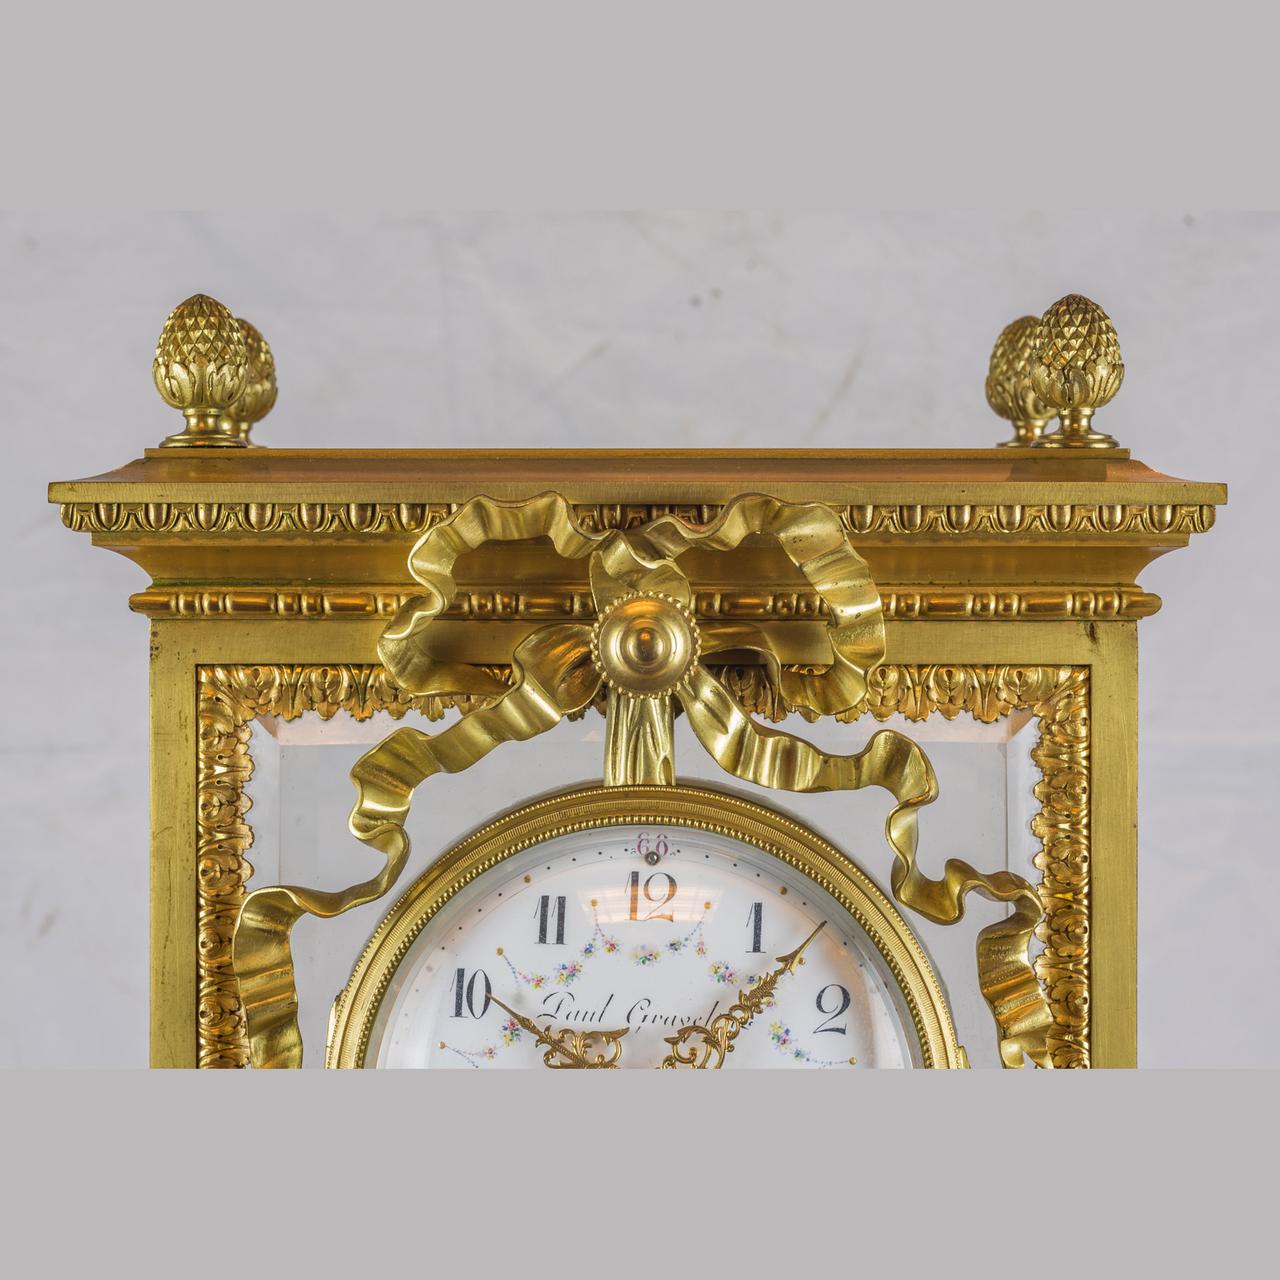 French Gilt Bronze and Rouge Marble Mantel Clock by Lemerle-Charpentier & Cie Paris